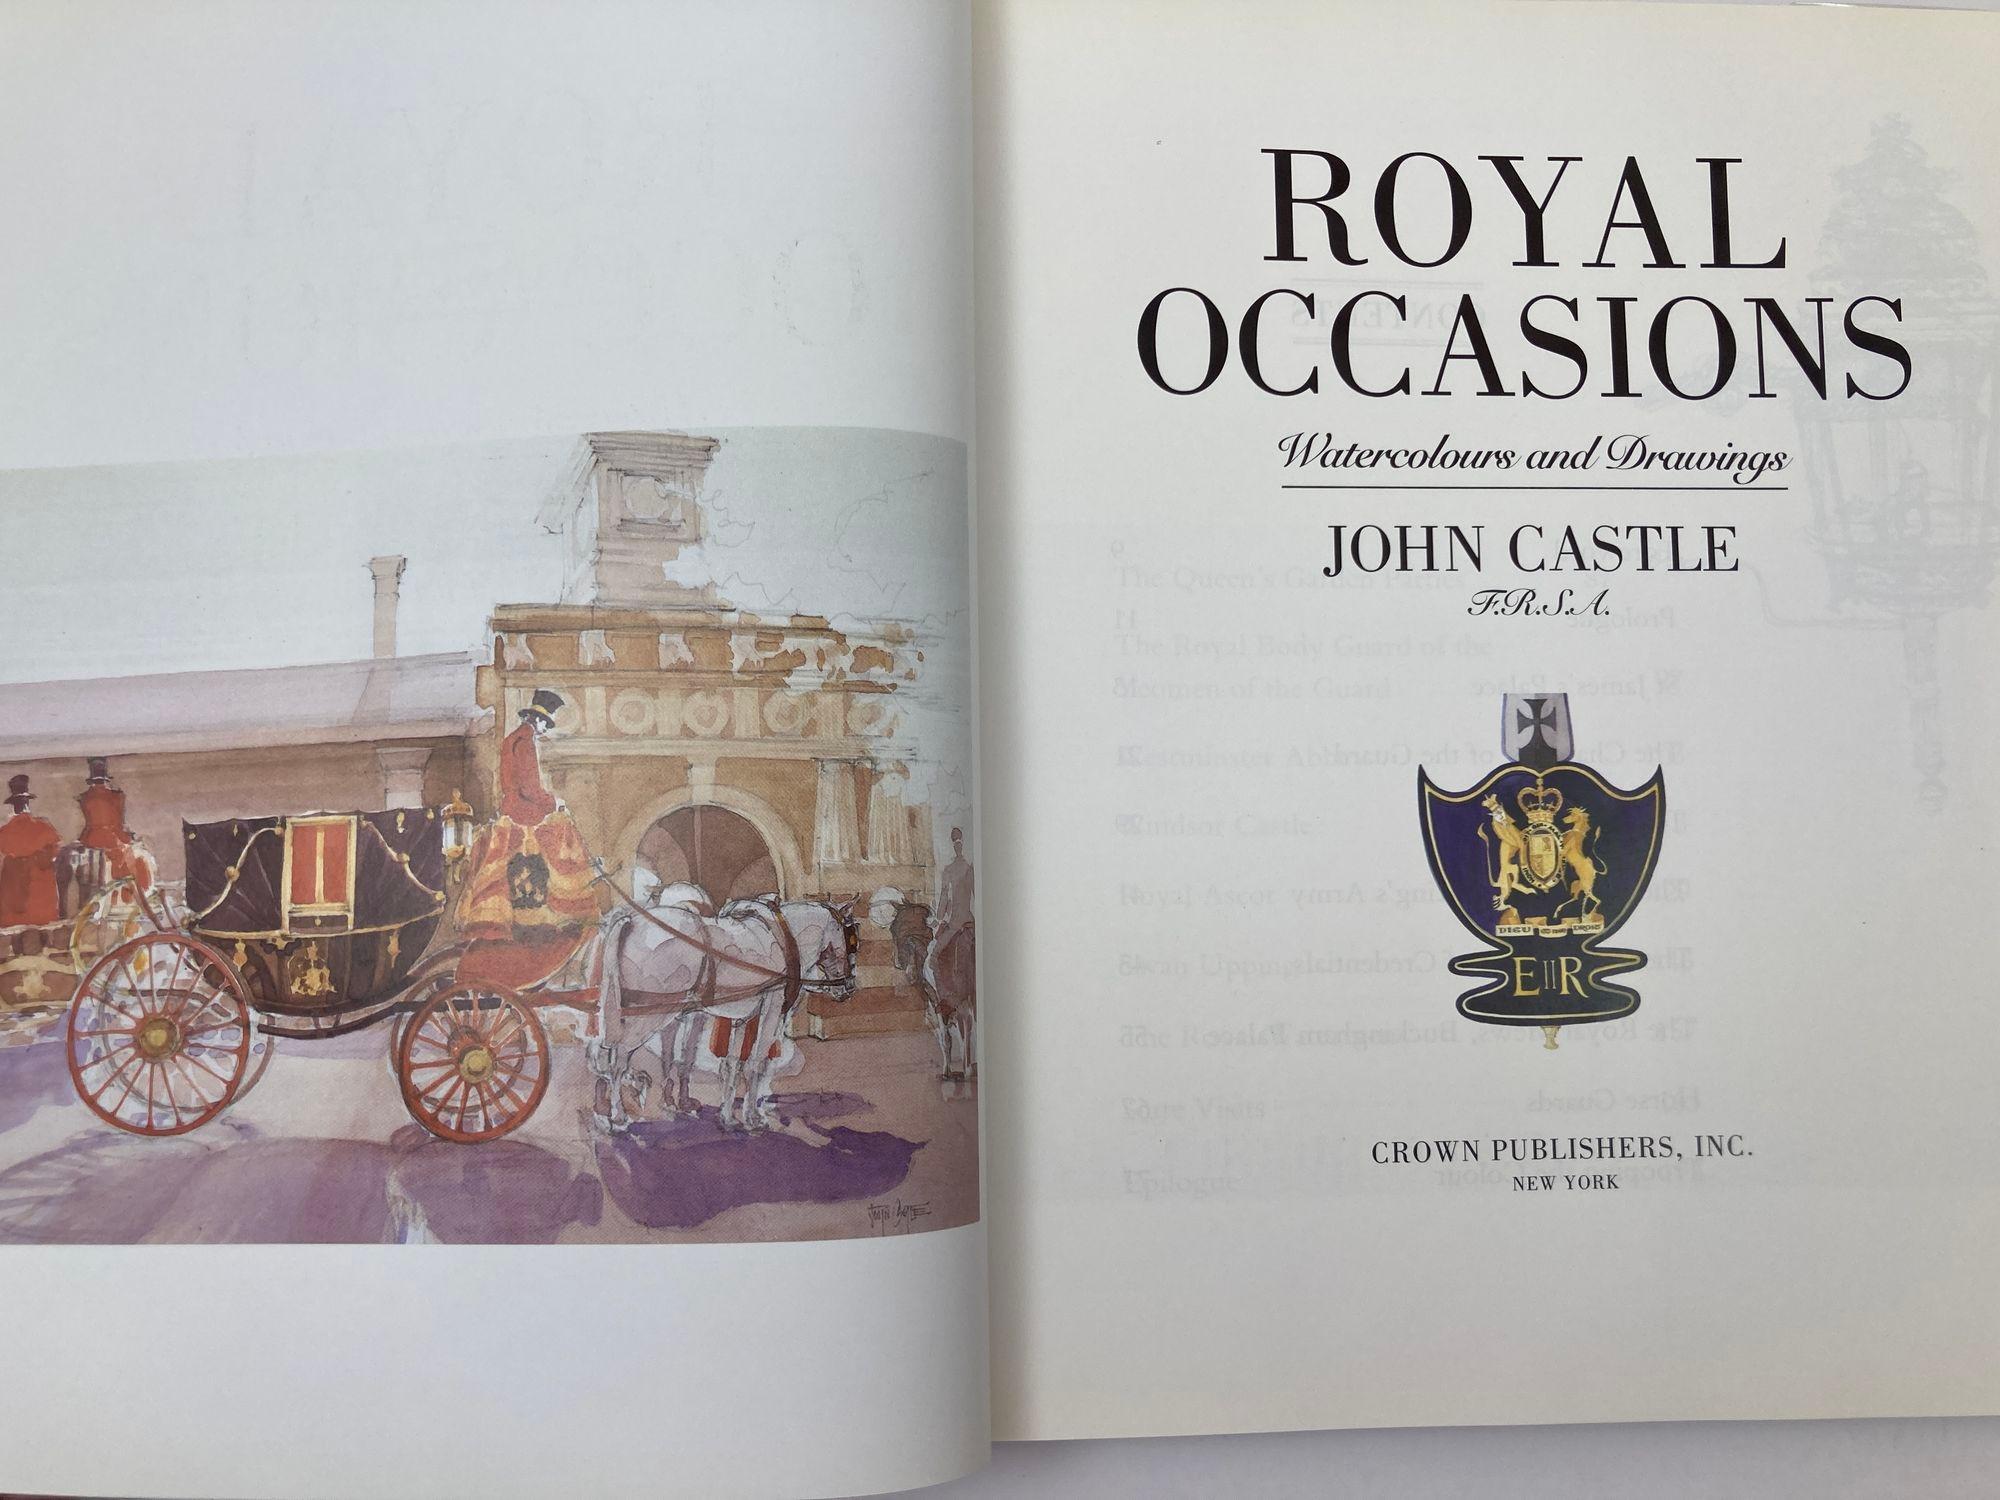 Royal Occasions: Watercolors and Drawings by John Castle Hardcover Book For Sale 1